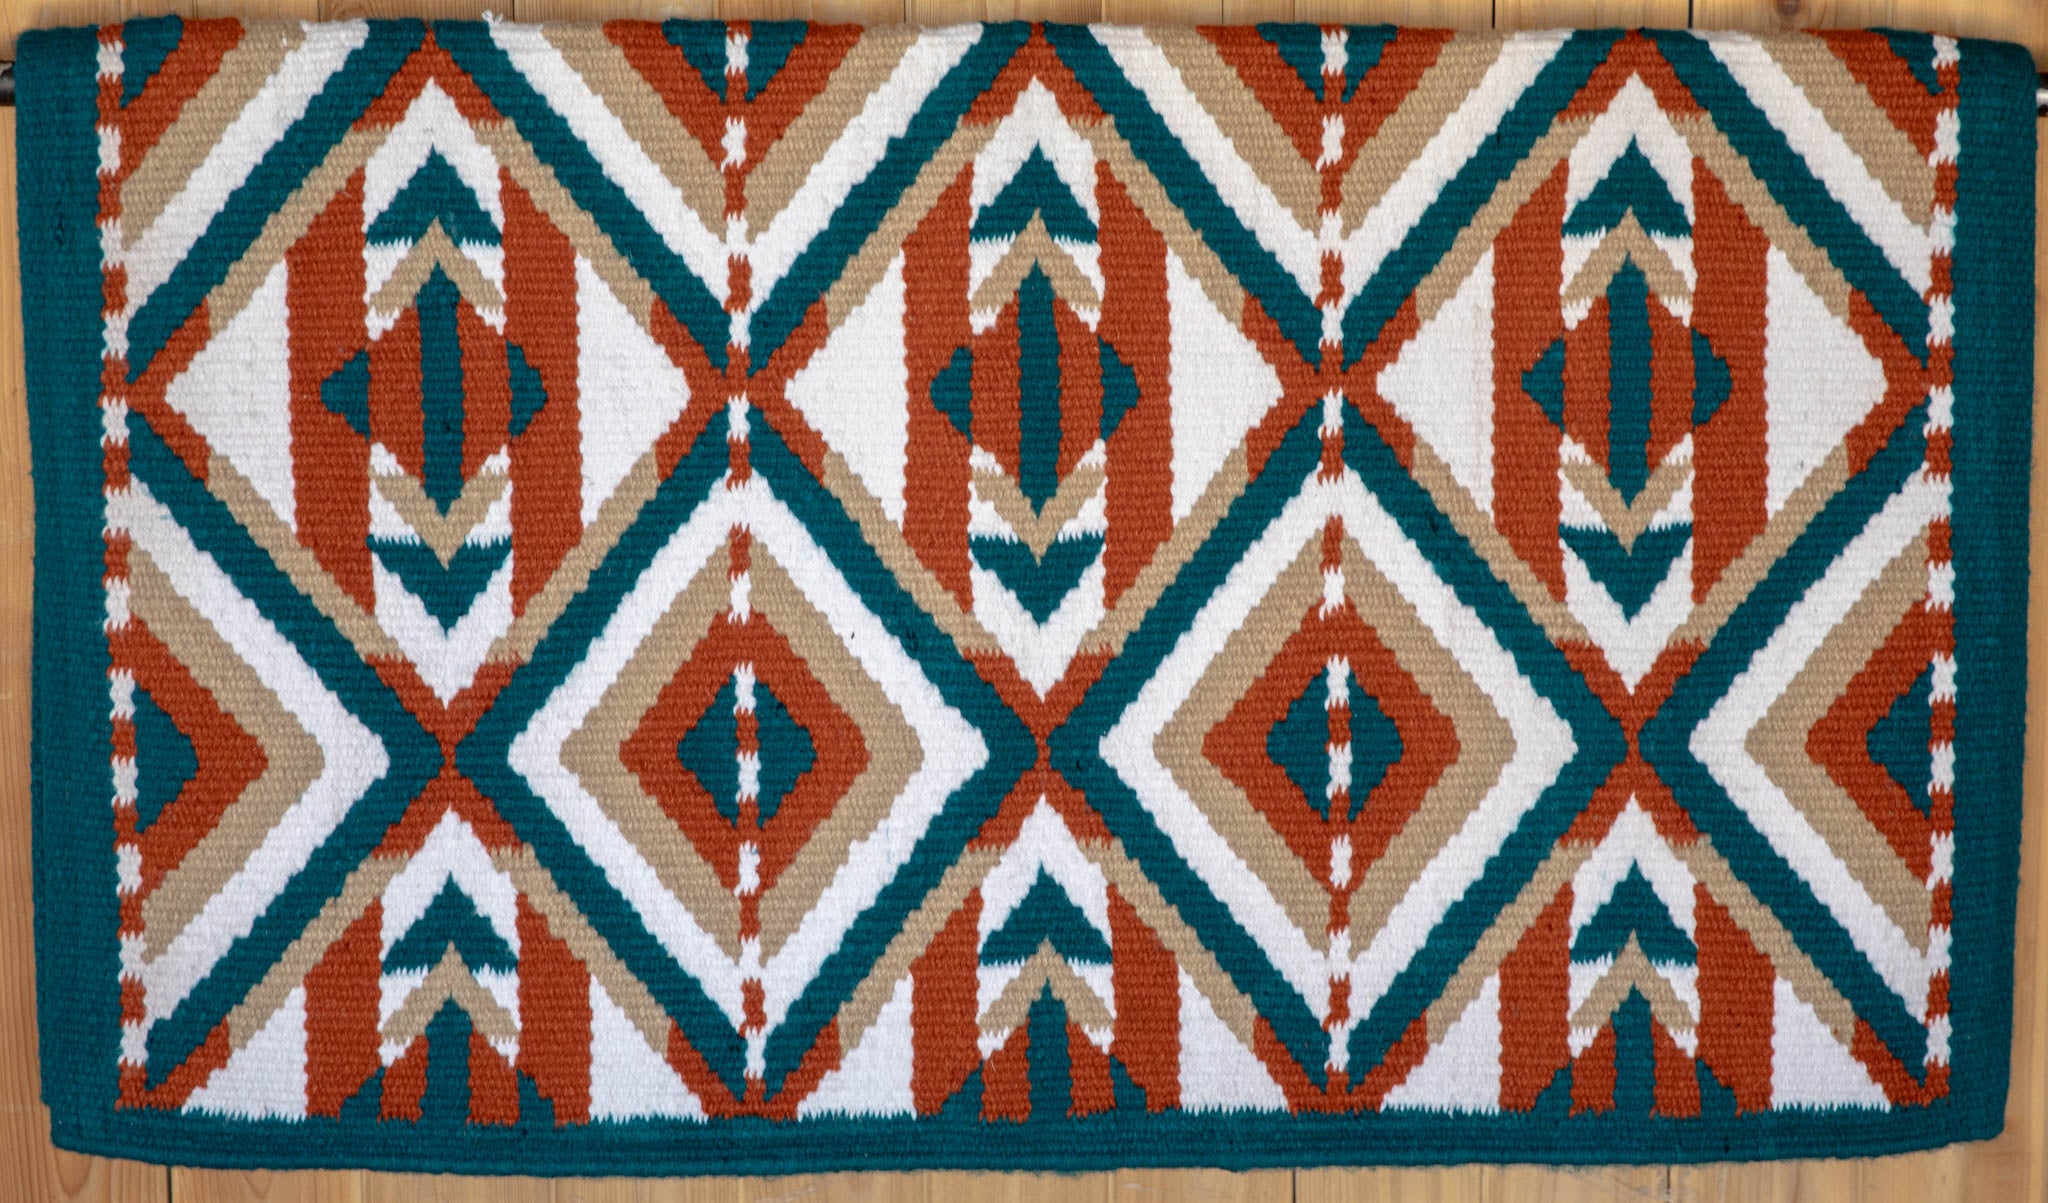 Teal, Rust, Tan w/ White Accents Flat Show Blankets